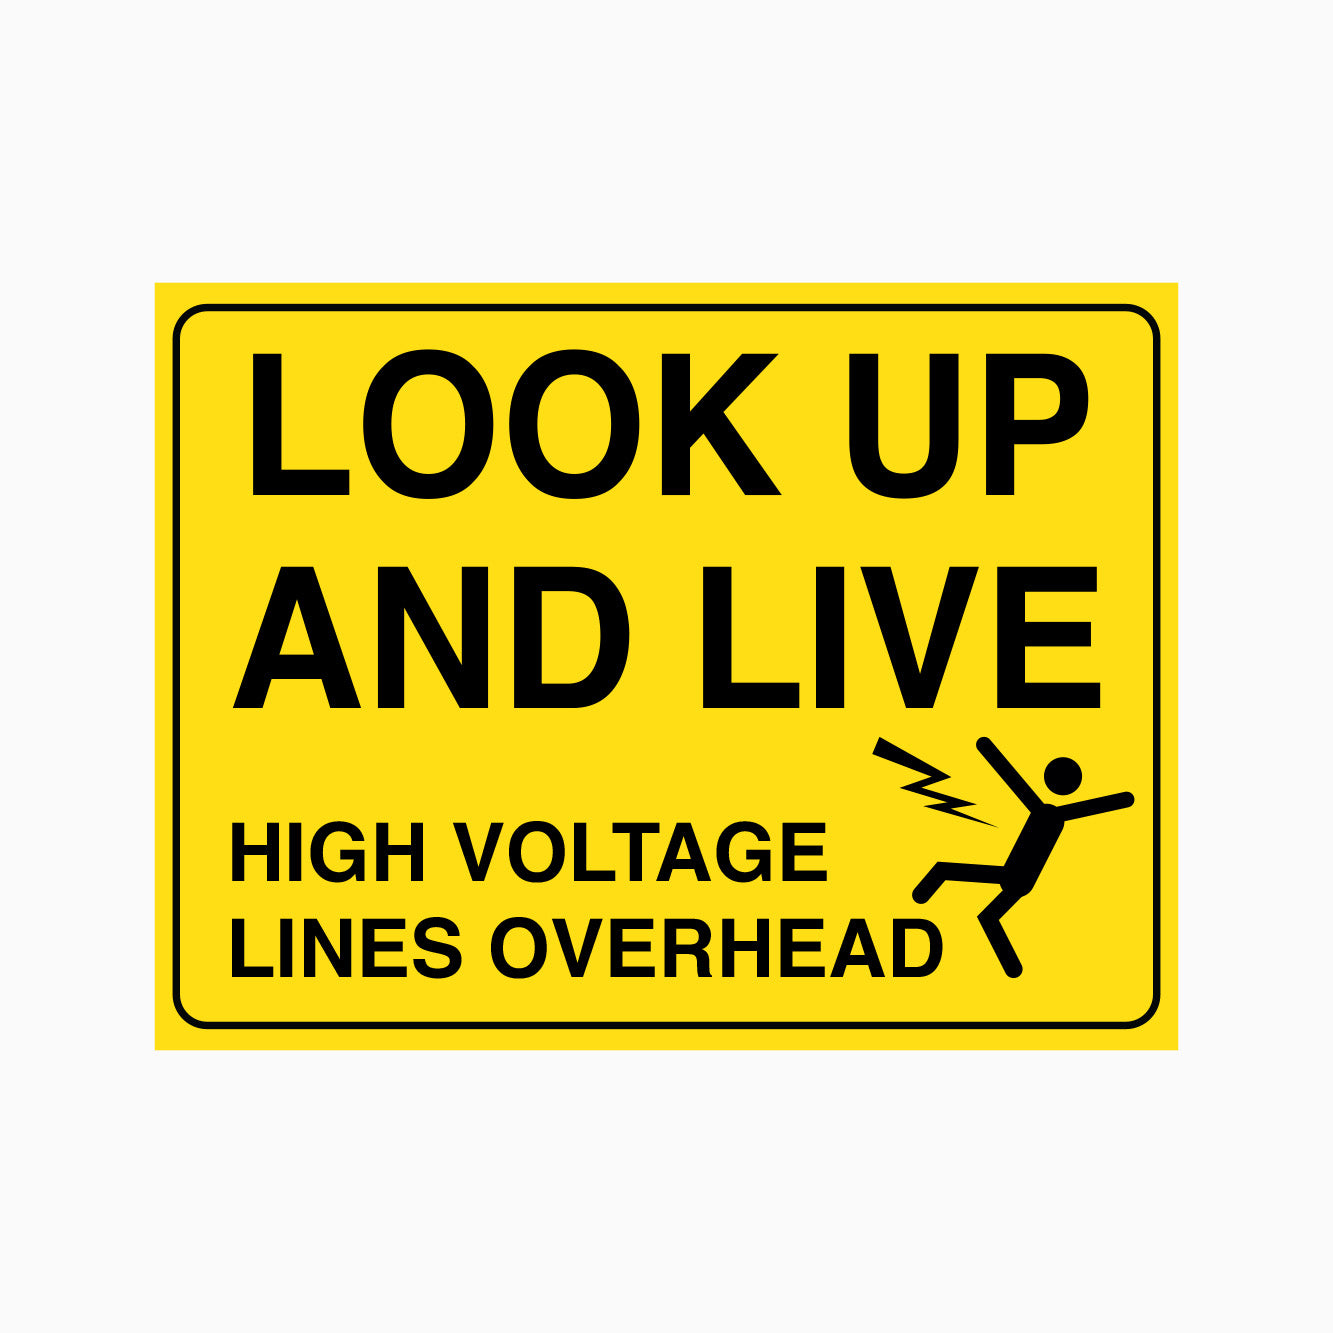 LOOK UP AND LIVE SIGN - HIGH VOLTAGE LINES OVERHEAD SIGN